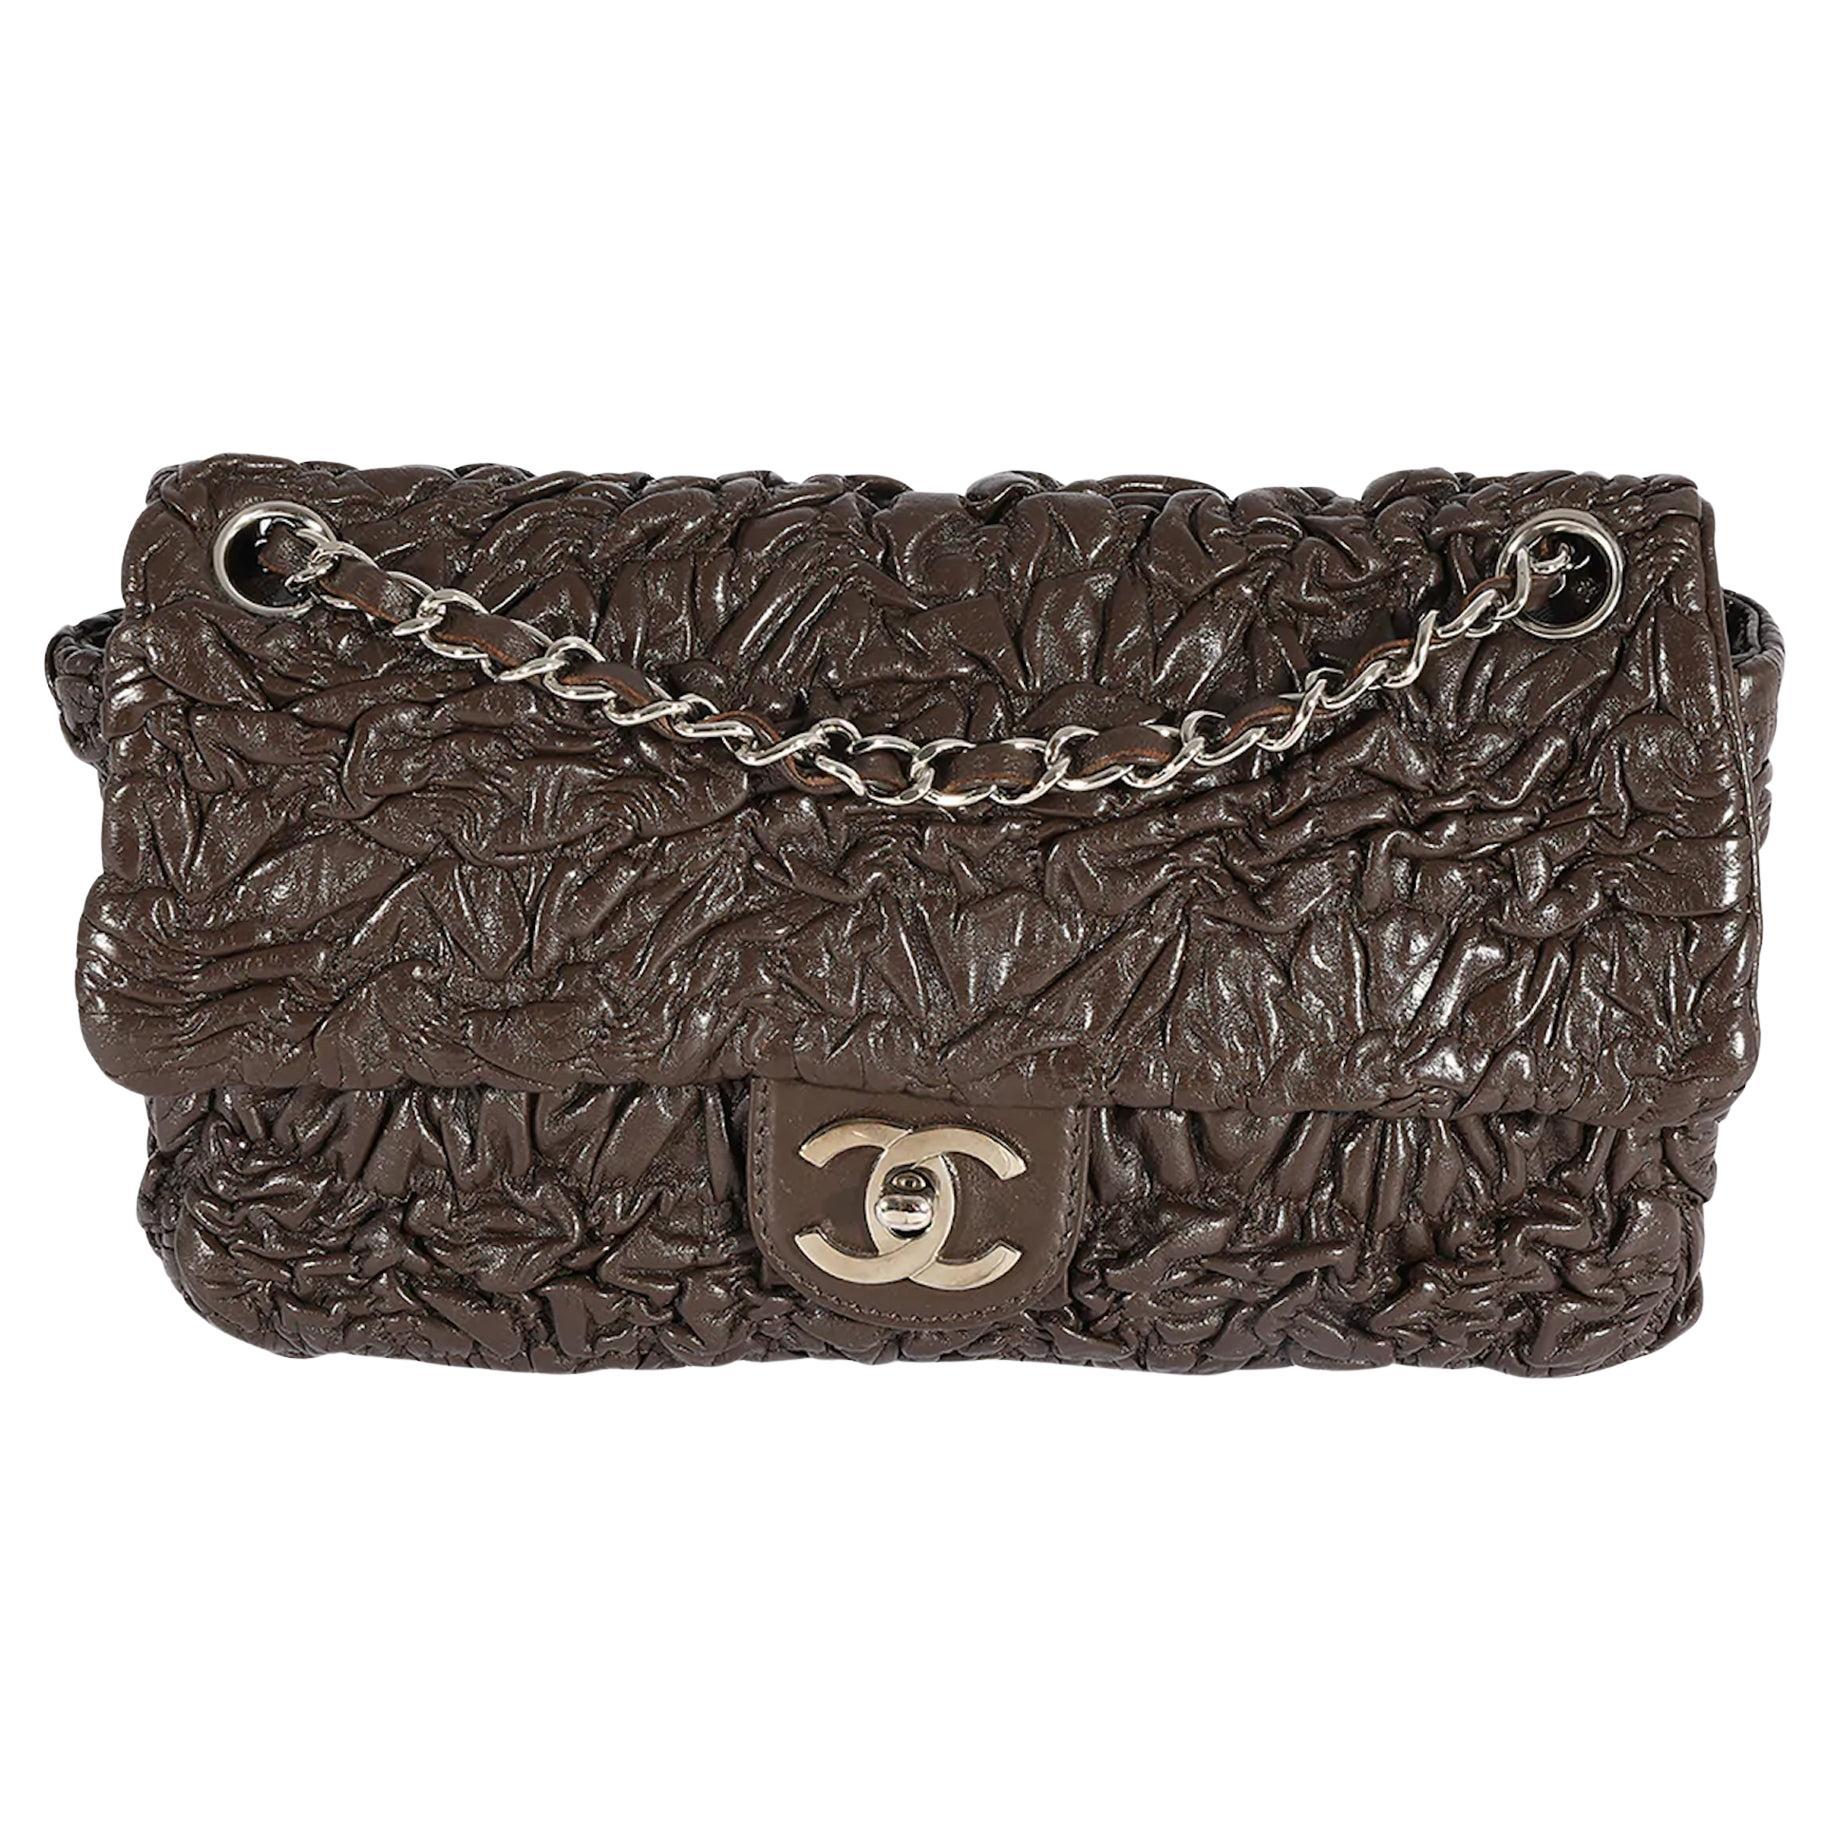 Chanel Chocolate Brown Ruched Wrinkled Leather Medium Classic Flap Bag 

Fall 2007 

Silver hardware
Classic interwoven leather shoulder strap
Brown ruched wrinkled leather 
Silver CC turn-lock closure 
Black nylon lining
Single interior zippered